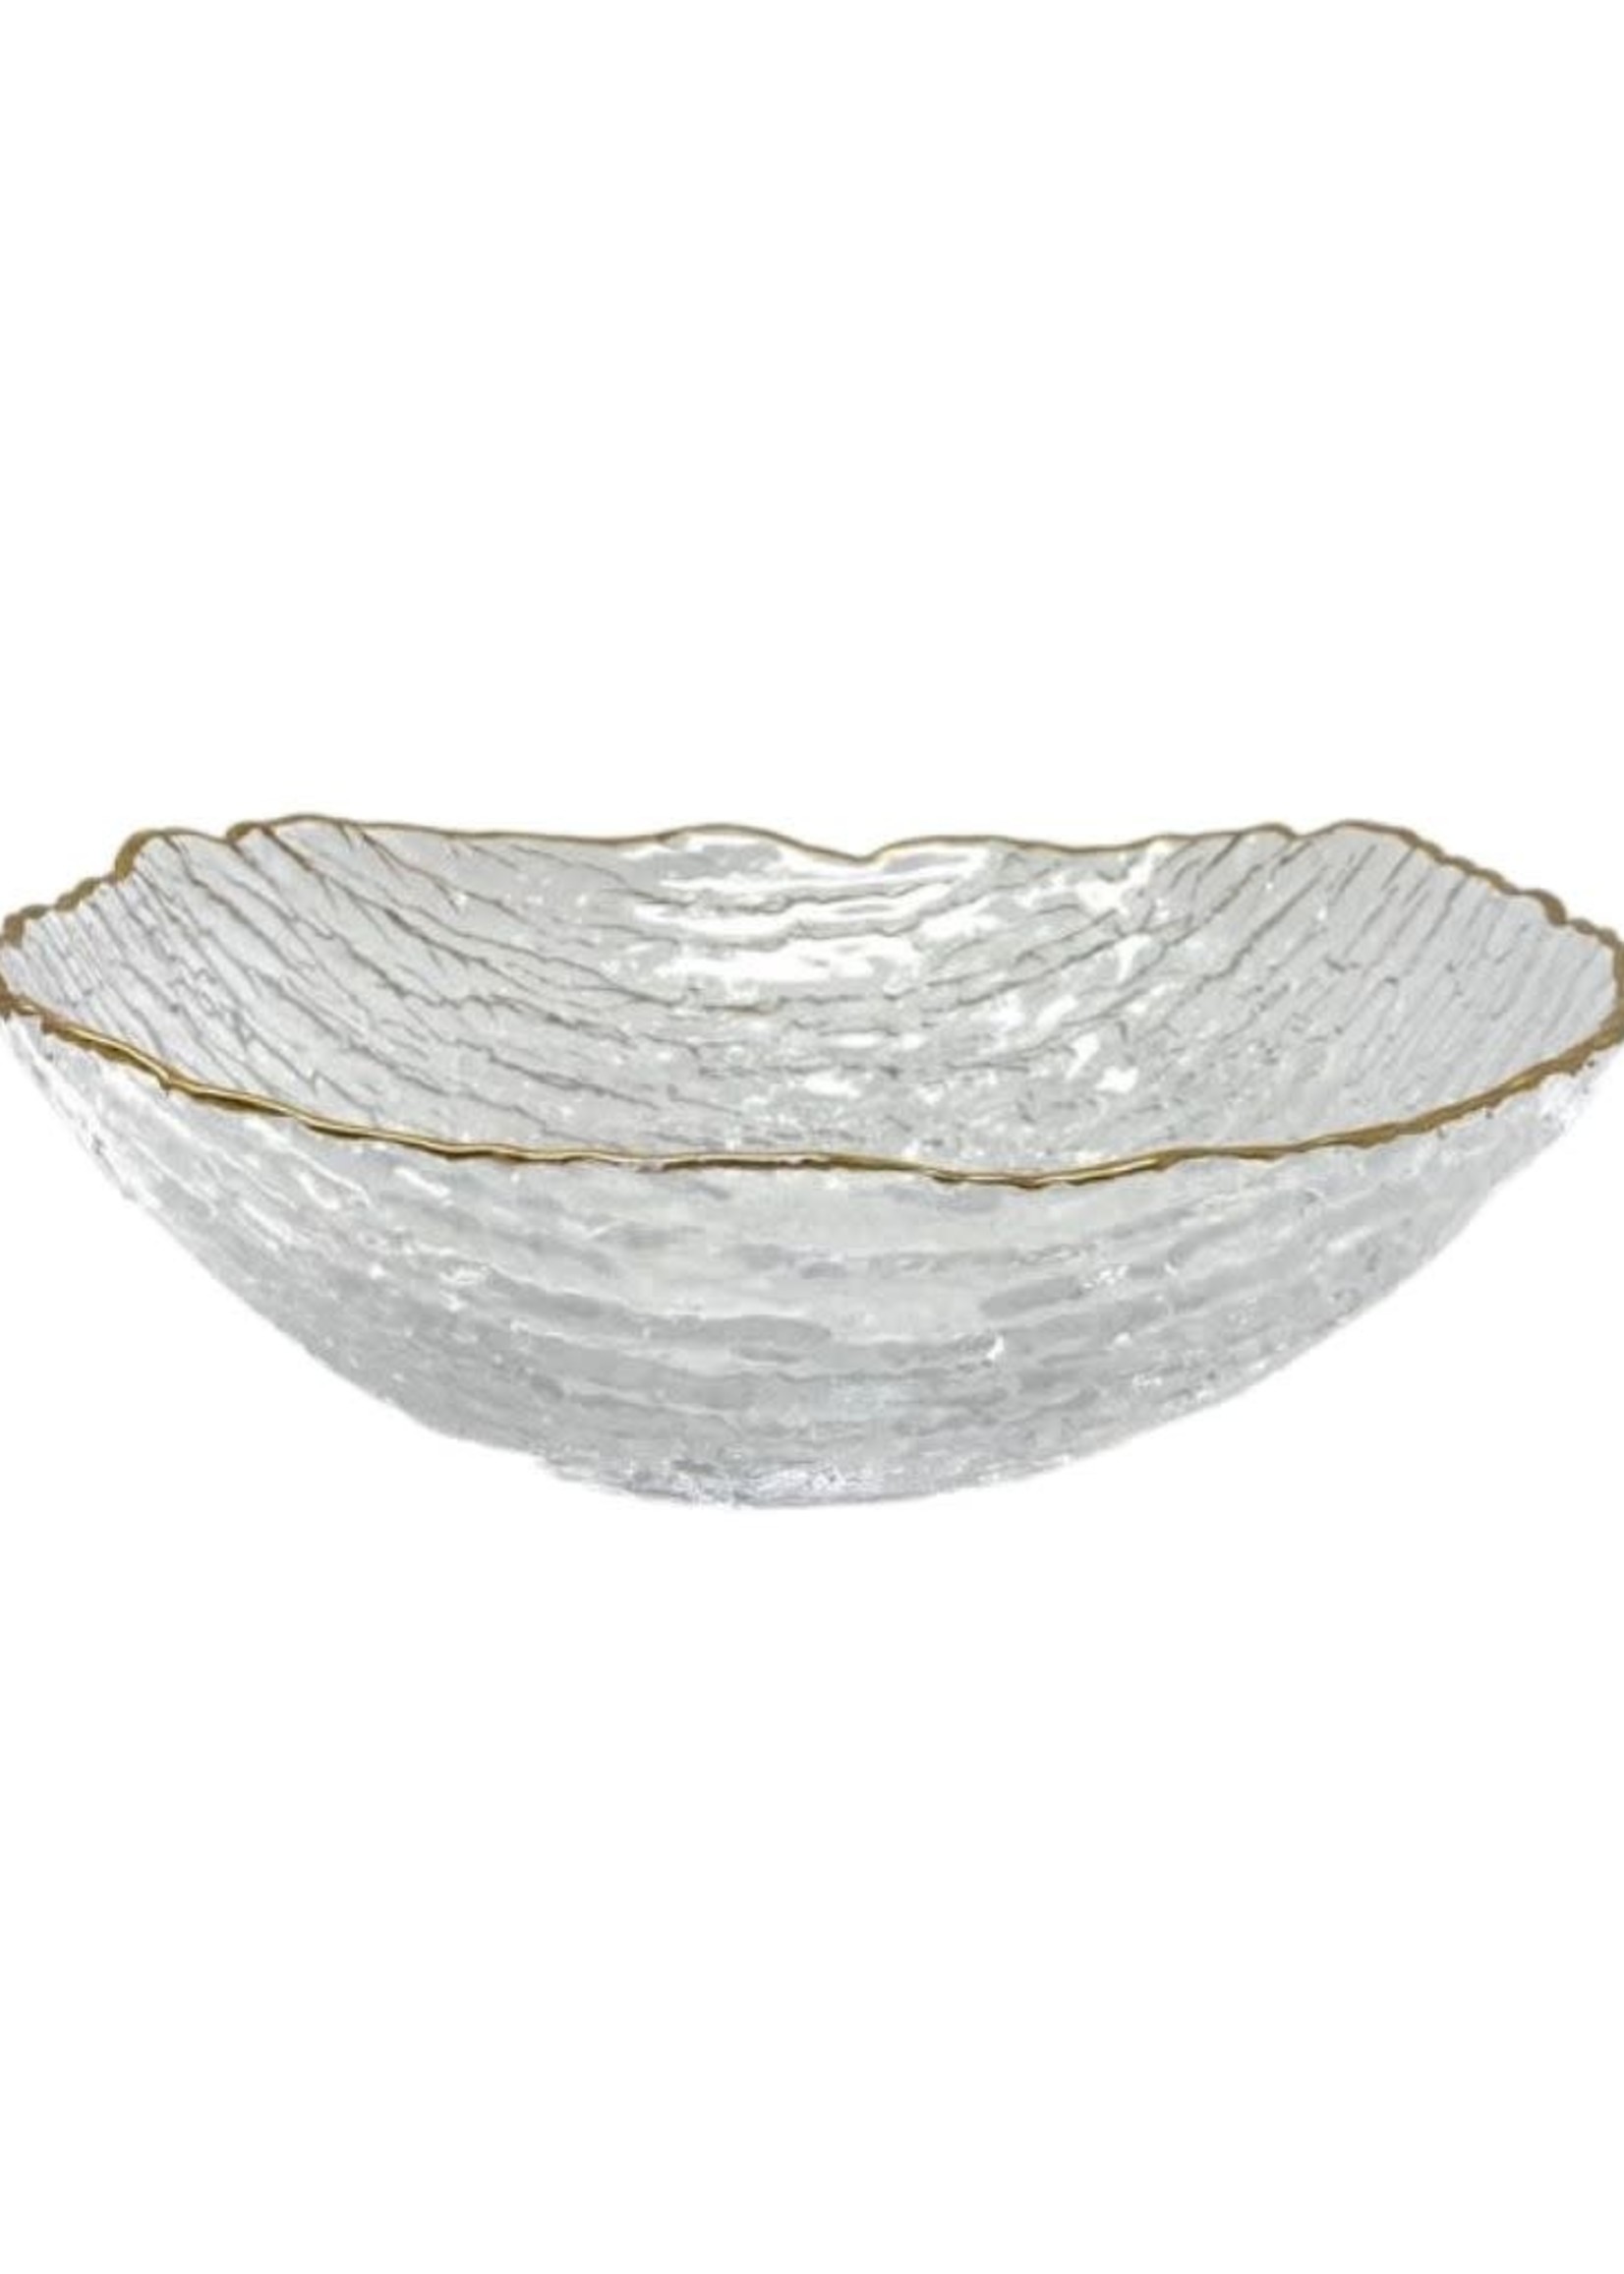 Crushed Glass Salad Bowl With Gold Rim